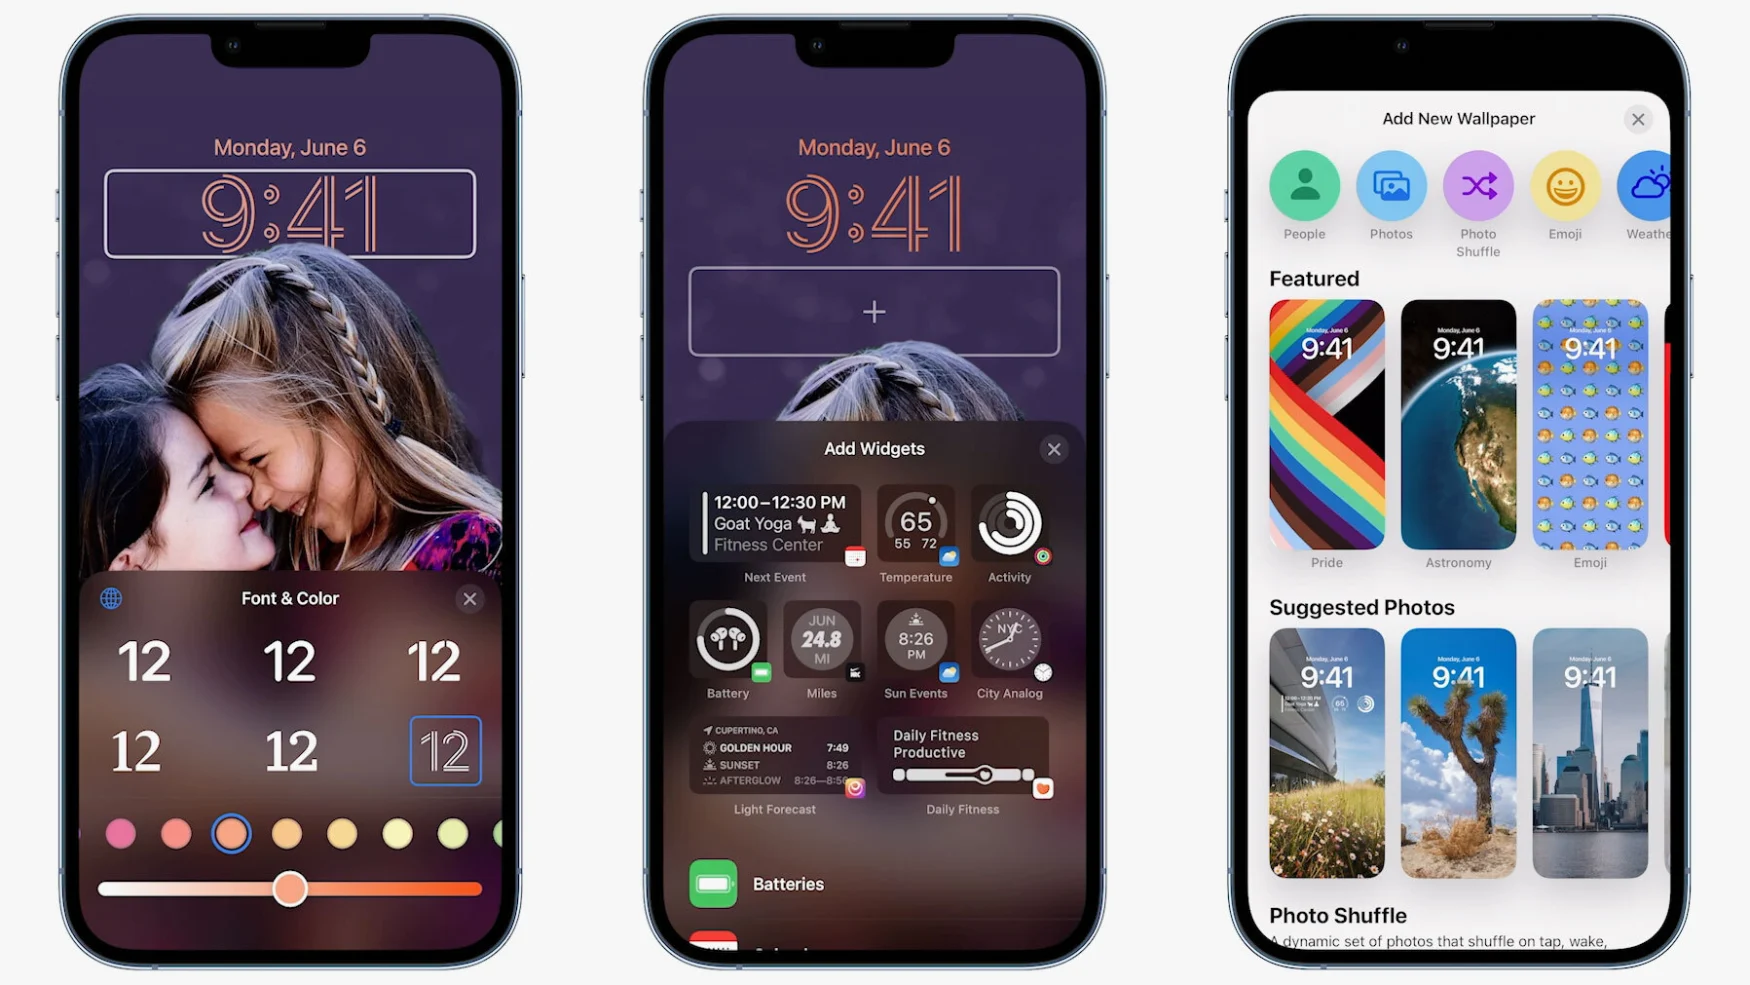 The new lock screen in iOS 16 features a wide range of customization options for things like font and widgets. 